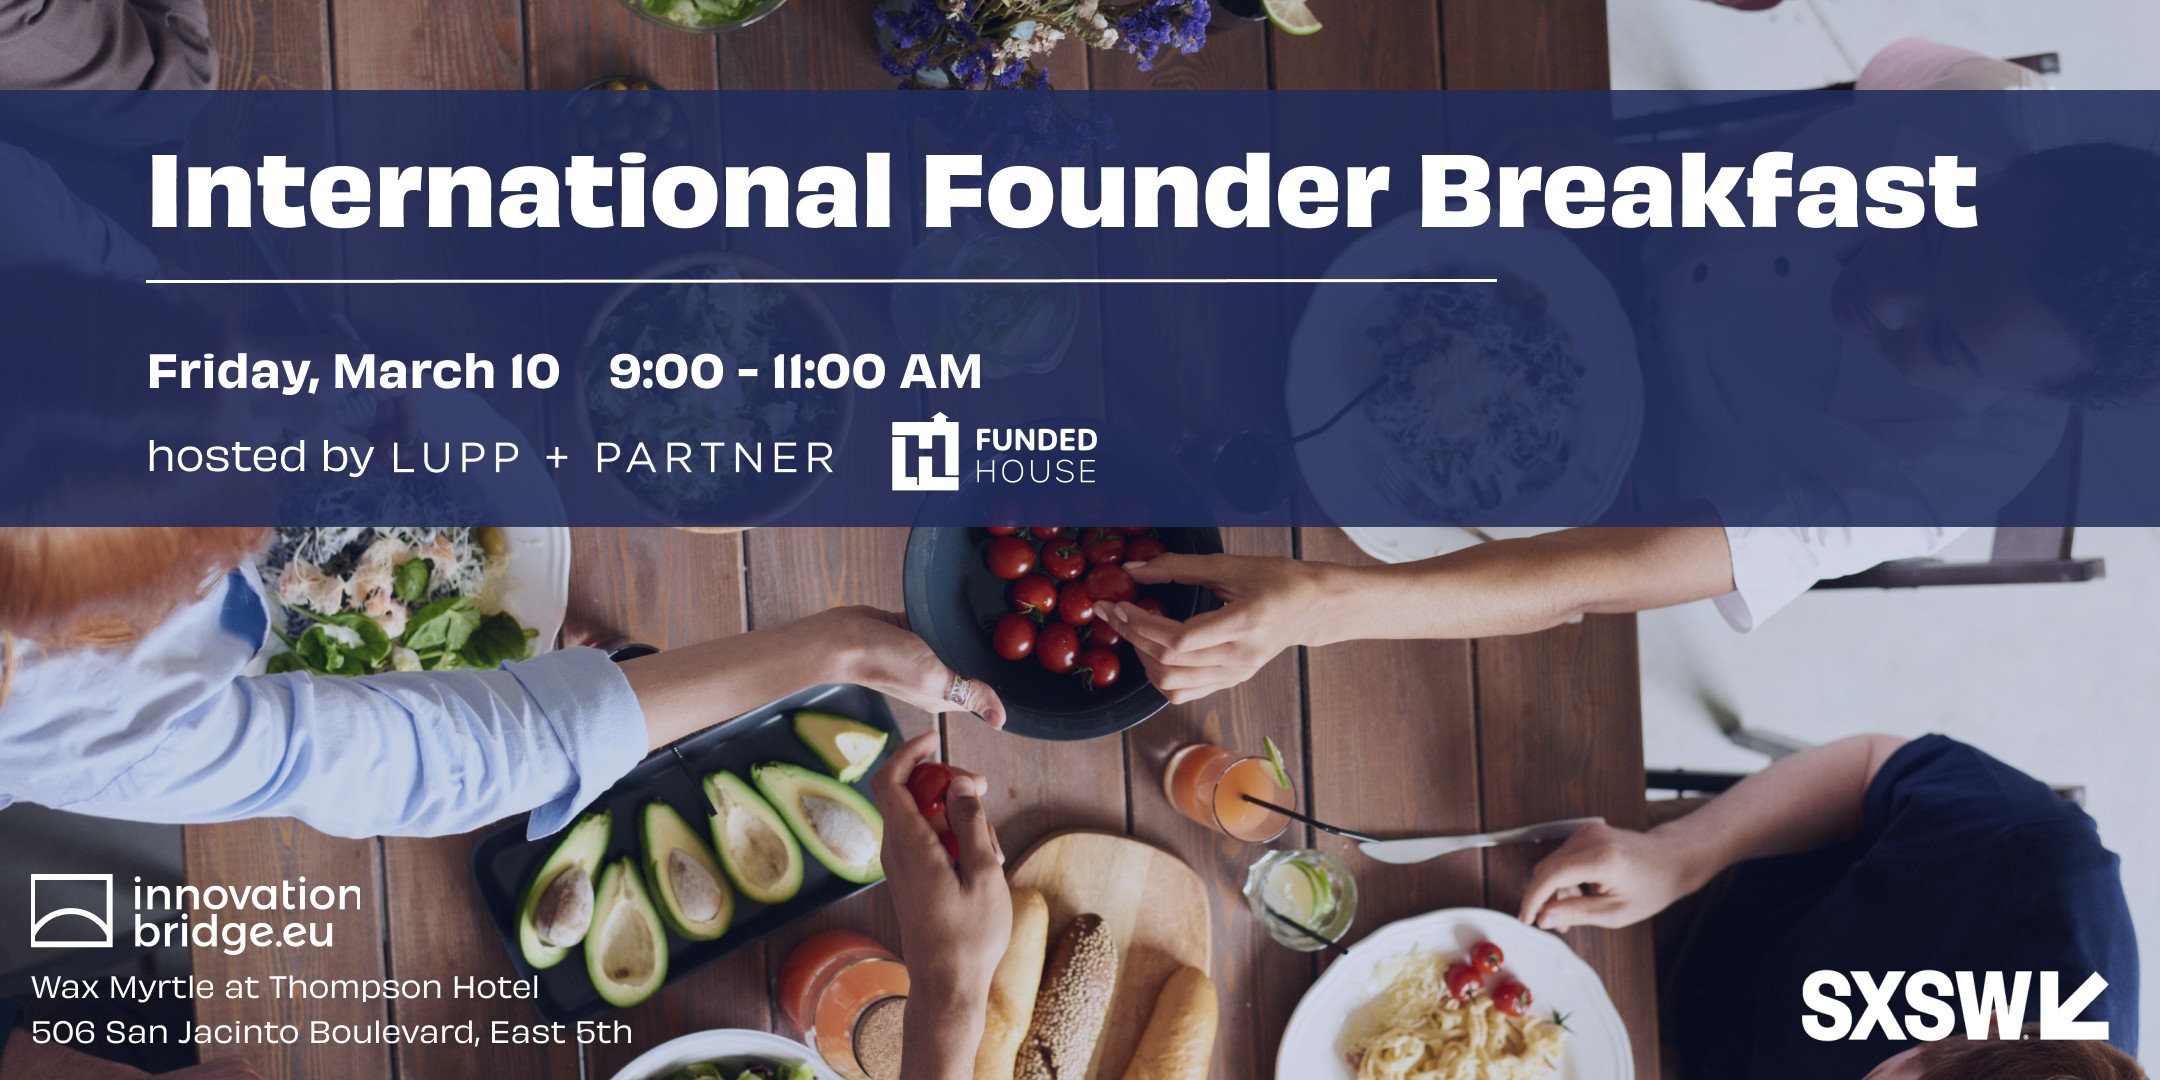 International Founder Breakfast Event Page